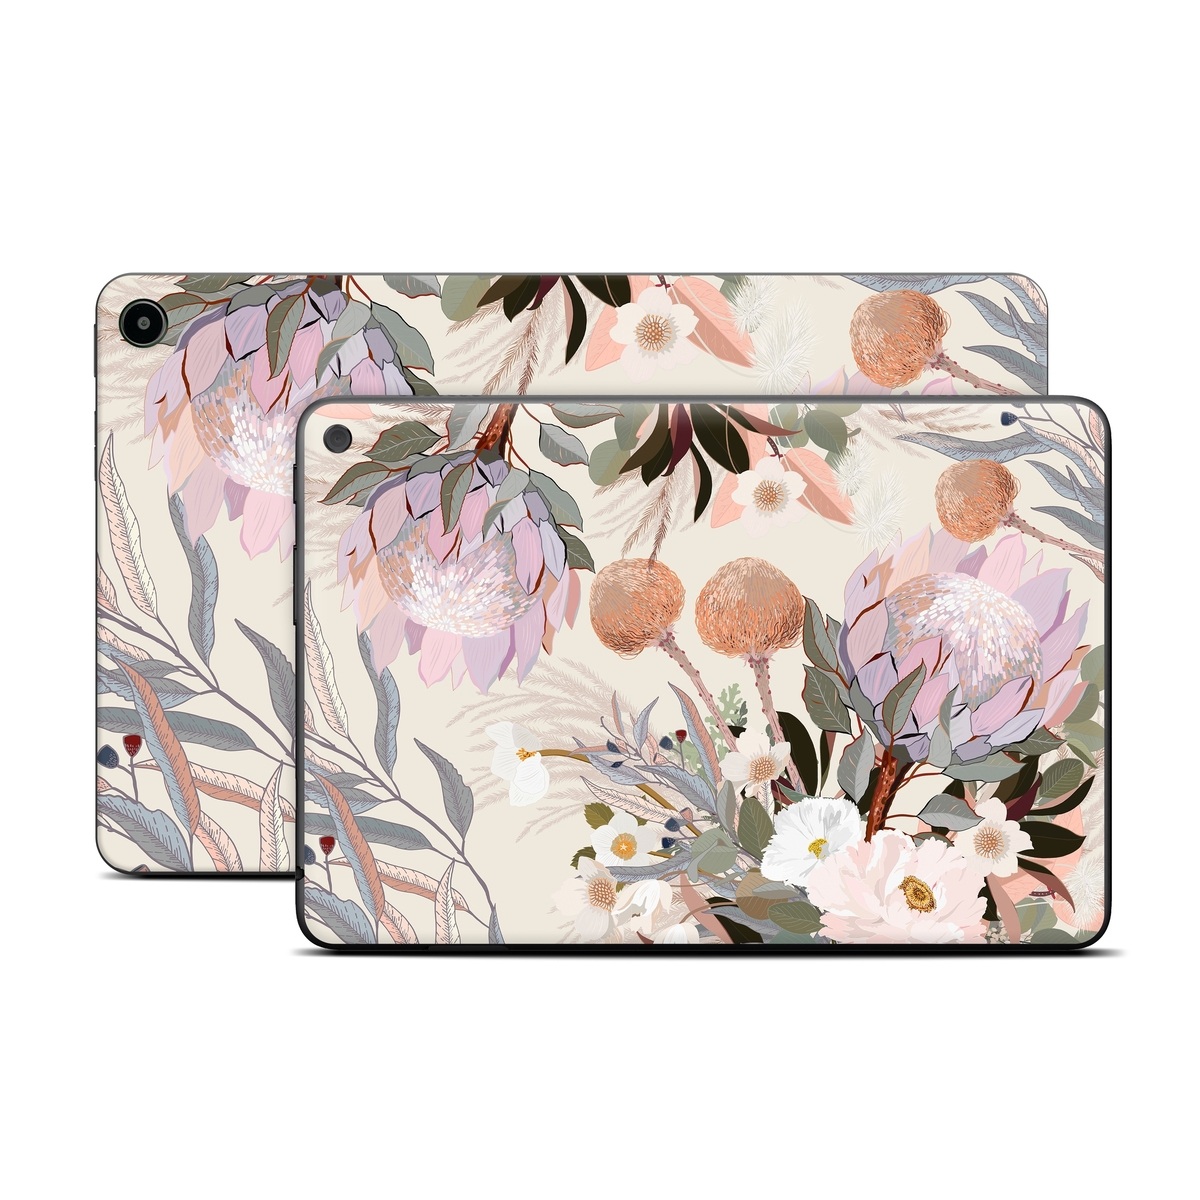 Amazon Fire Tablet Series Skin Skin design of Flower, Floral design, Watercolor paint, Plant, Spring, Branch, Flower Arranging, Lilac, Floristry, Petal, with pink, purple, green, brown, white, yellow, black colors